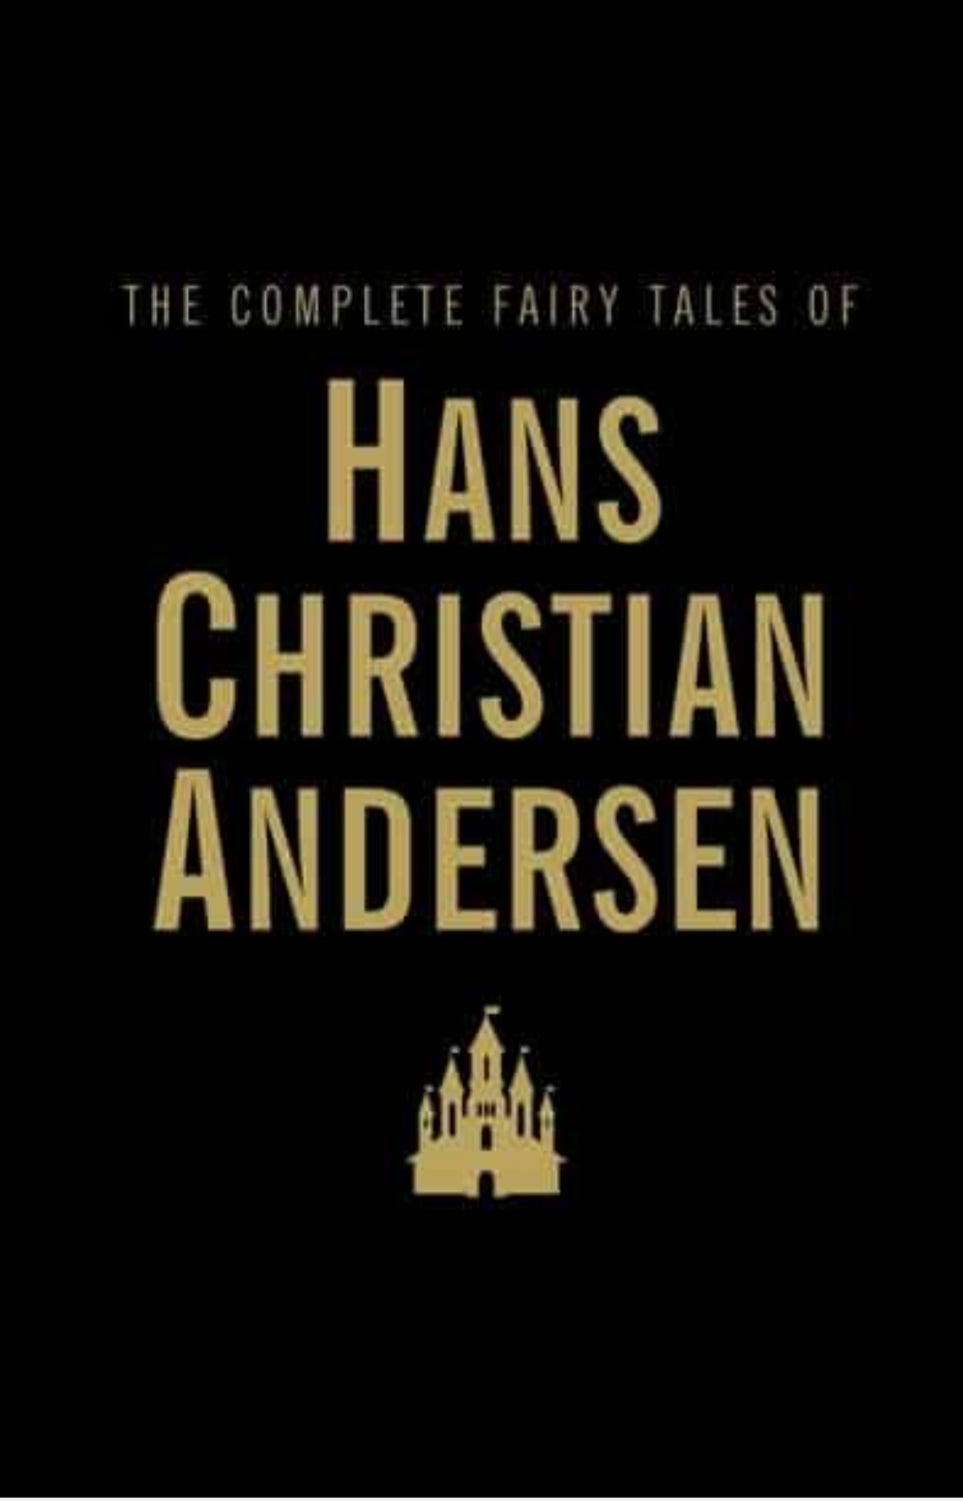 The COMPLETE FAIRY TALES OF HANS CHRISTIAN ANDERSEN